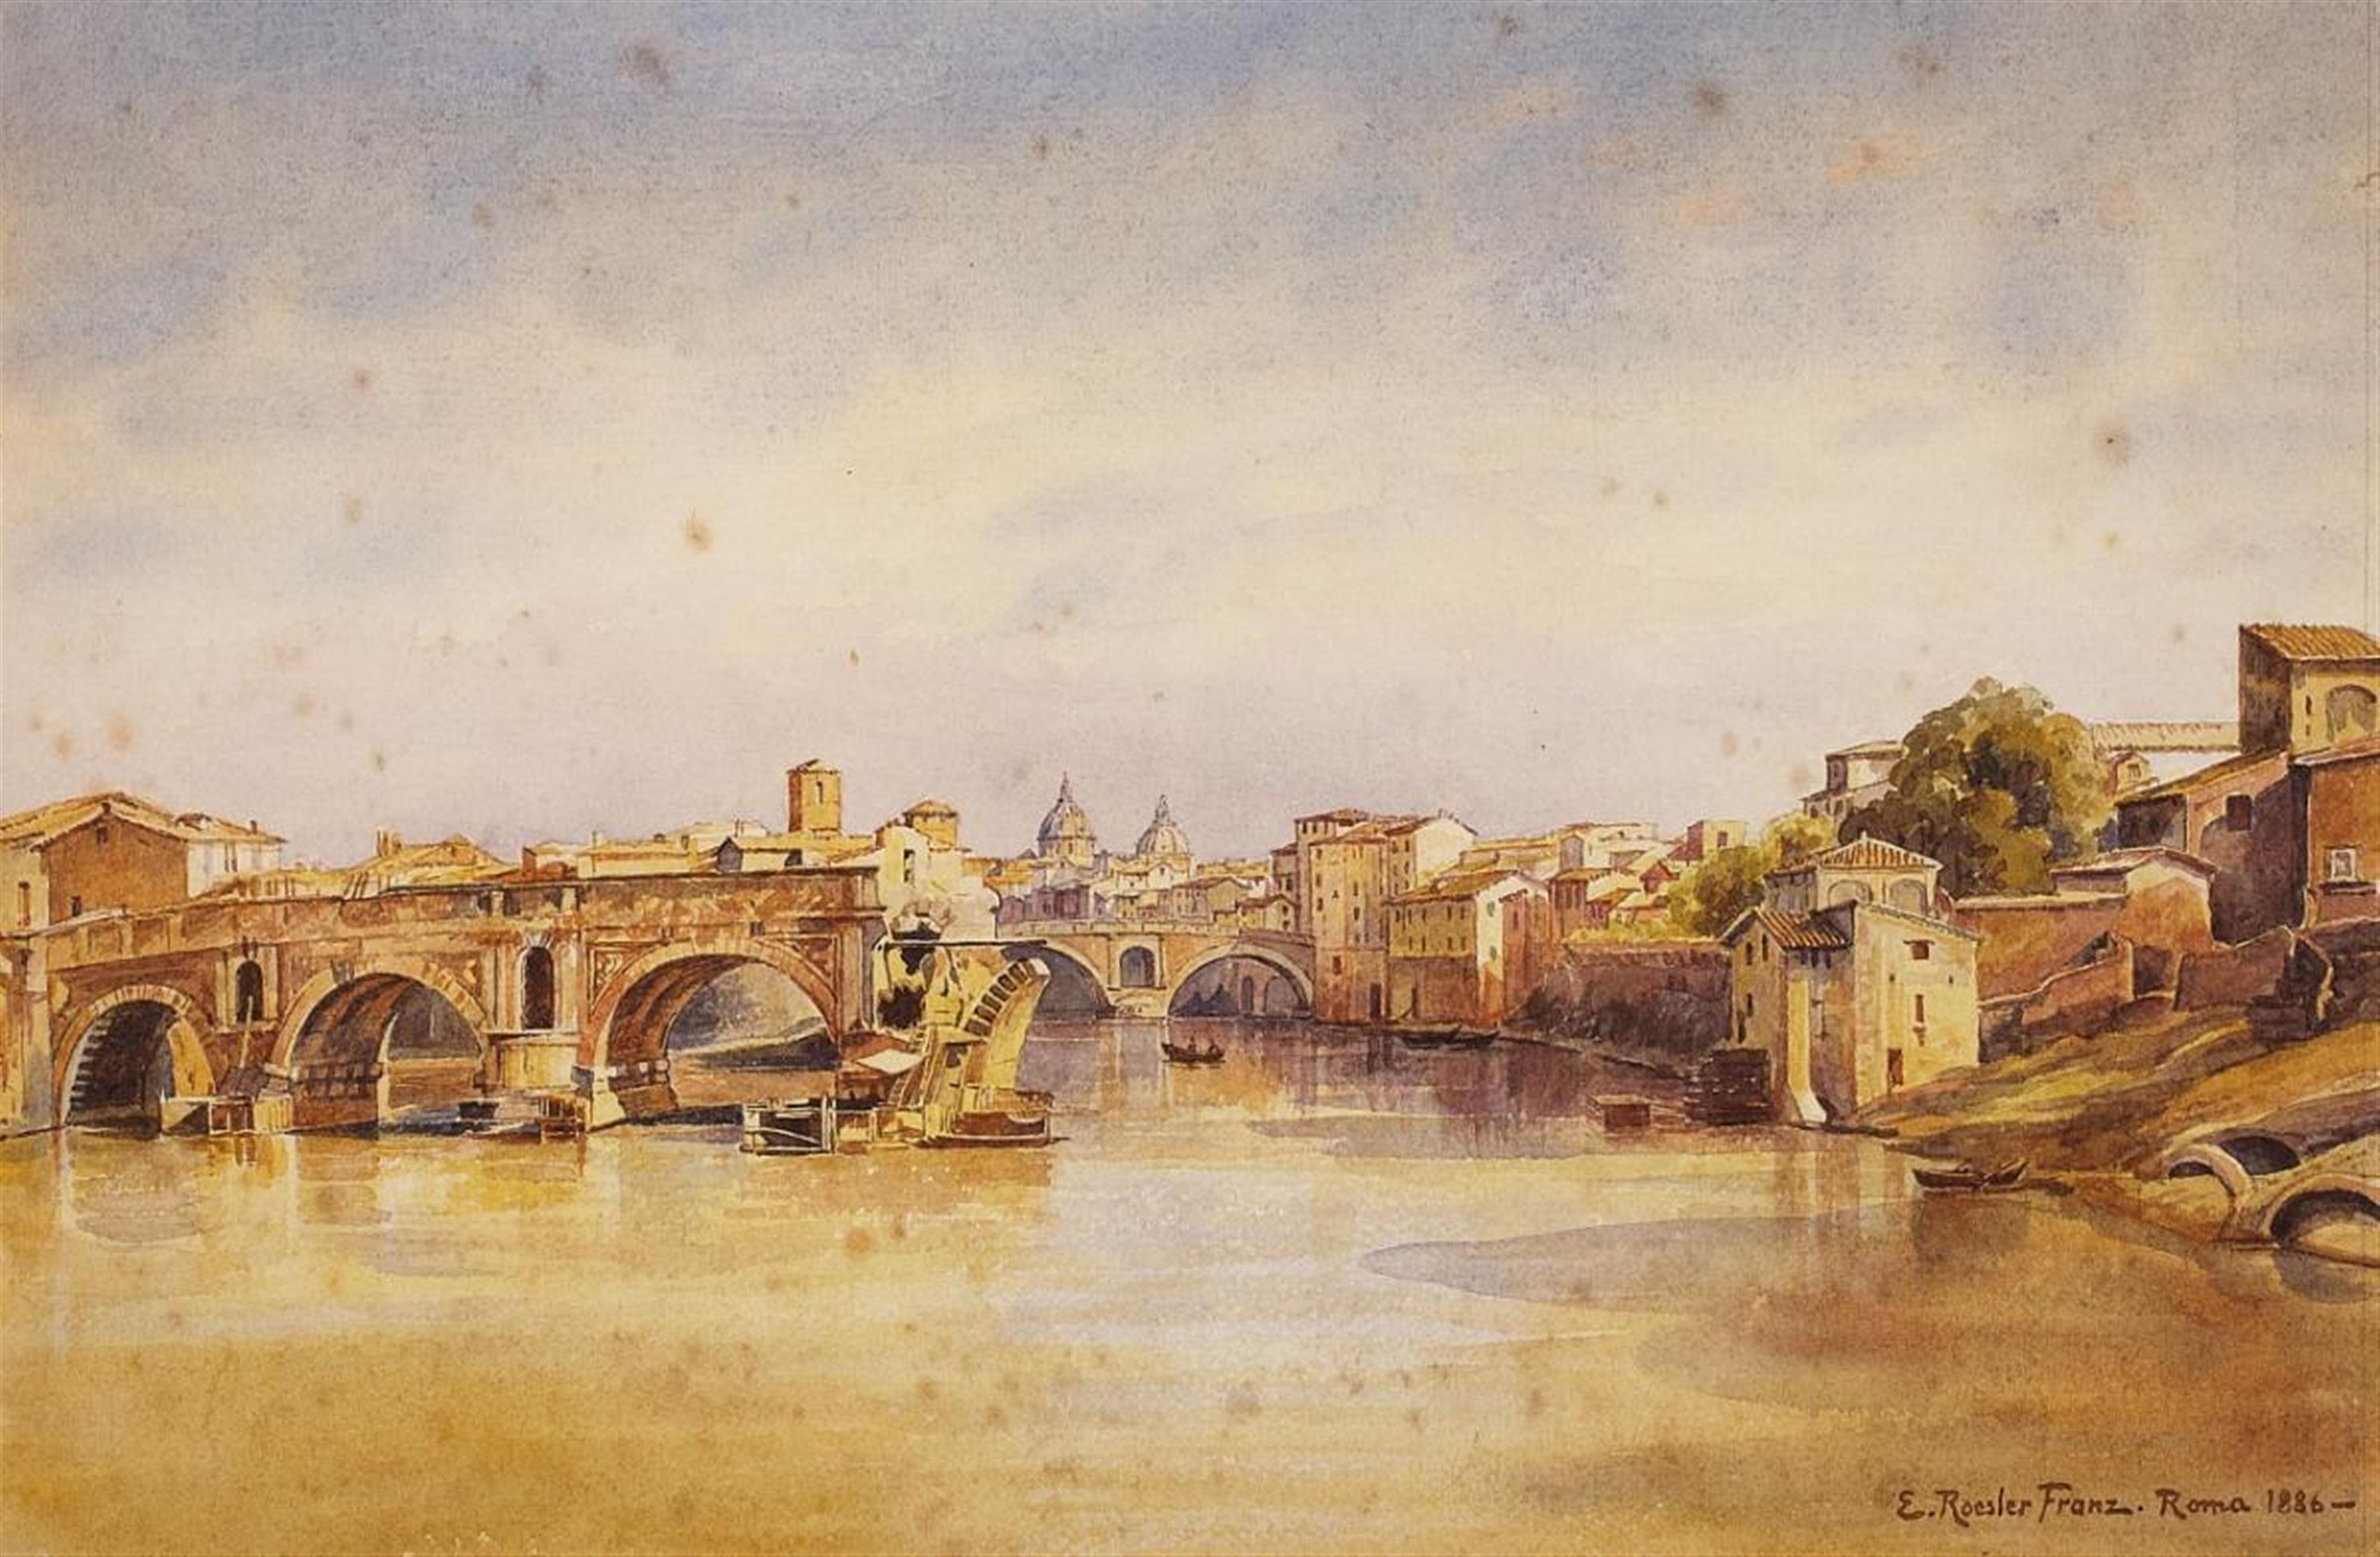 Ettore Roesler Franz - PONTE ROTO IN ROM - image-1